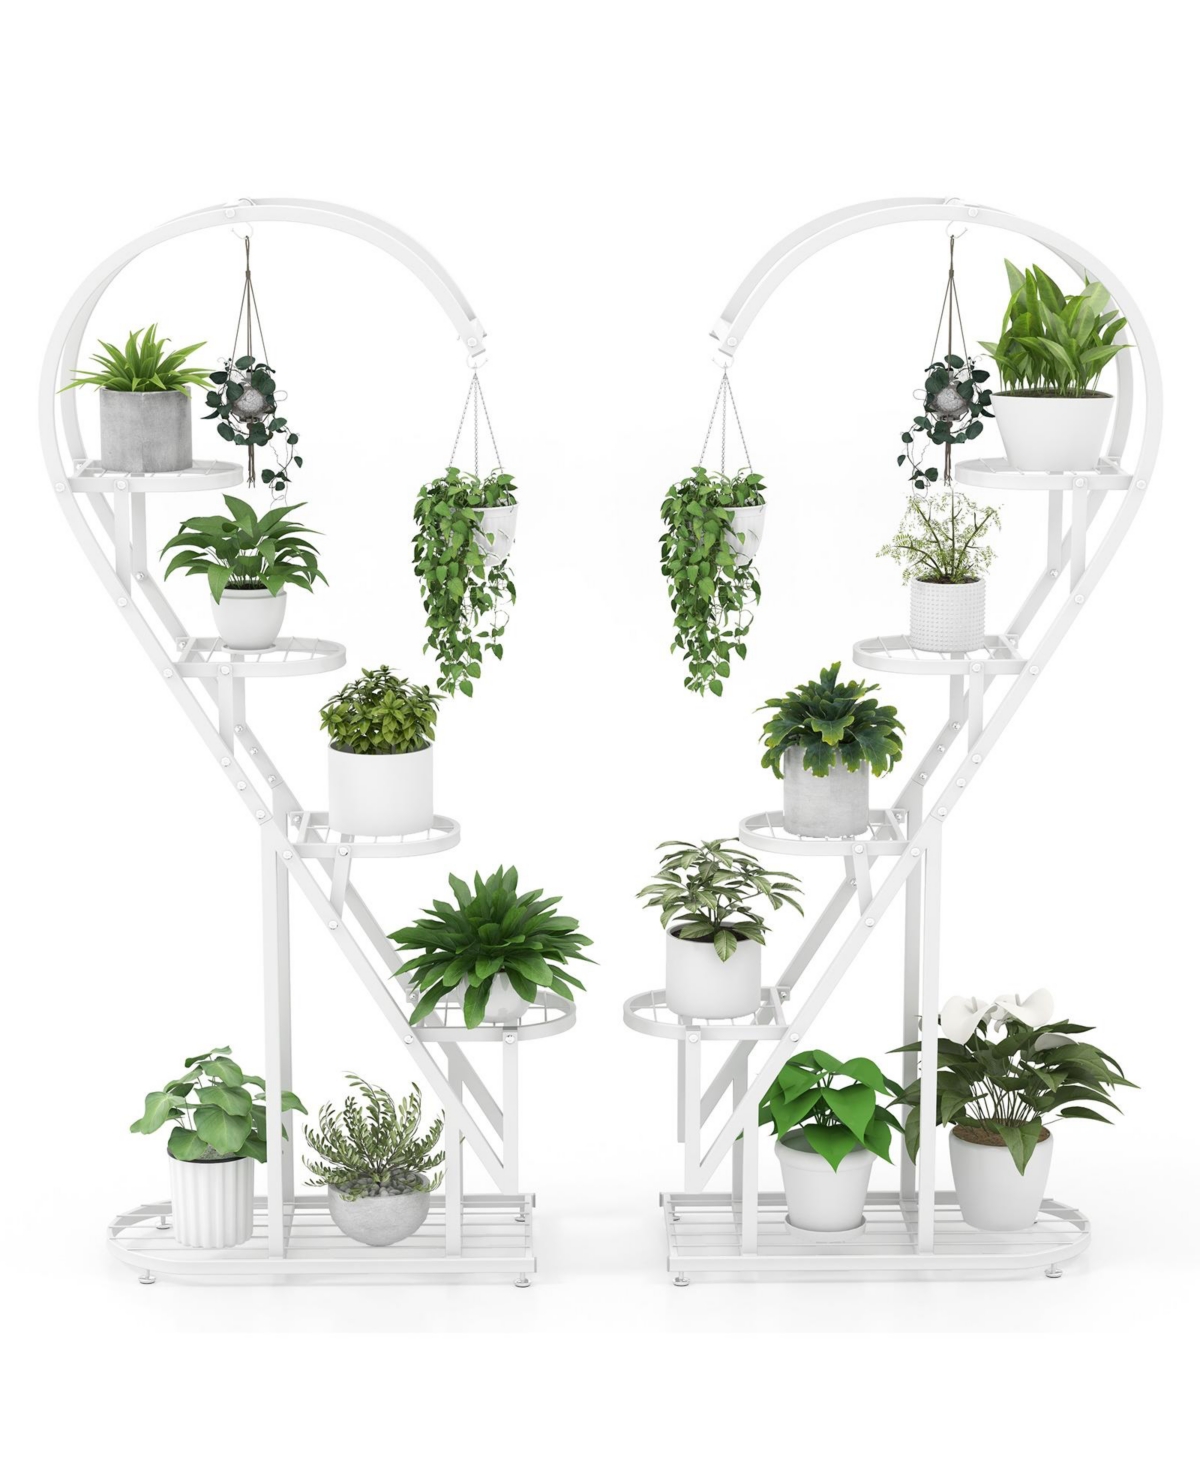 5 Tier Metal Plant Stand Heart-shaped Shelf with Hanging Hook for Multiple Plants - White